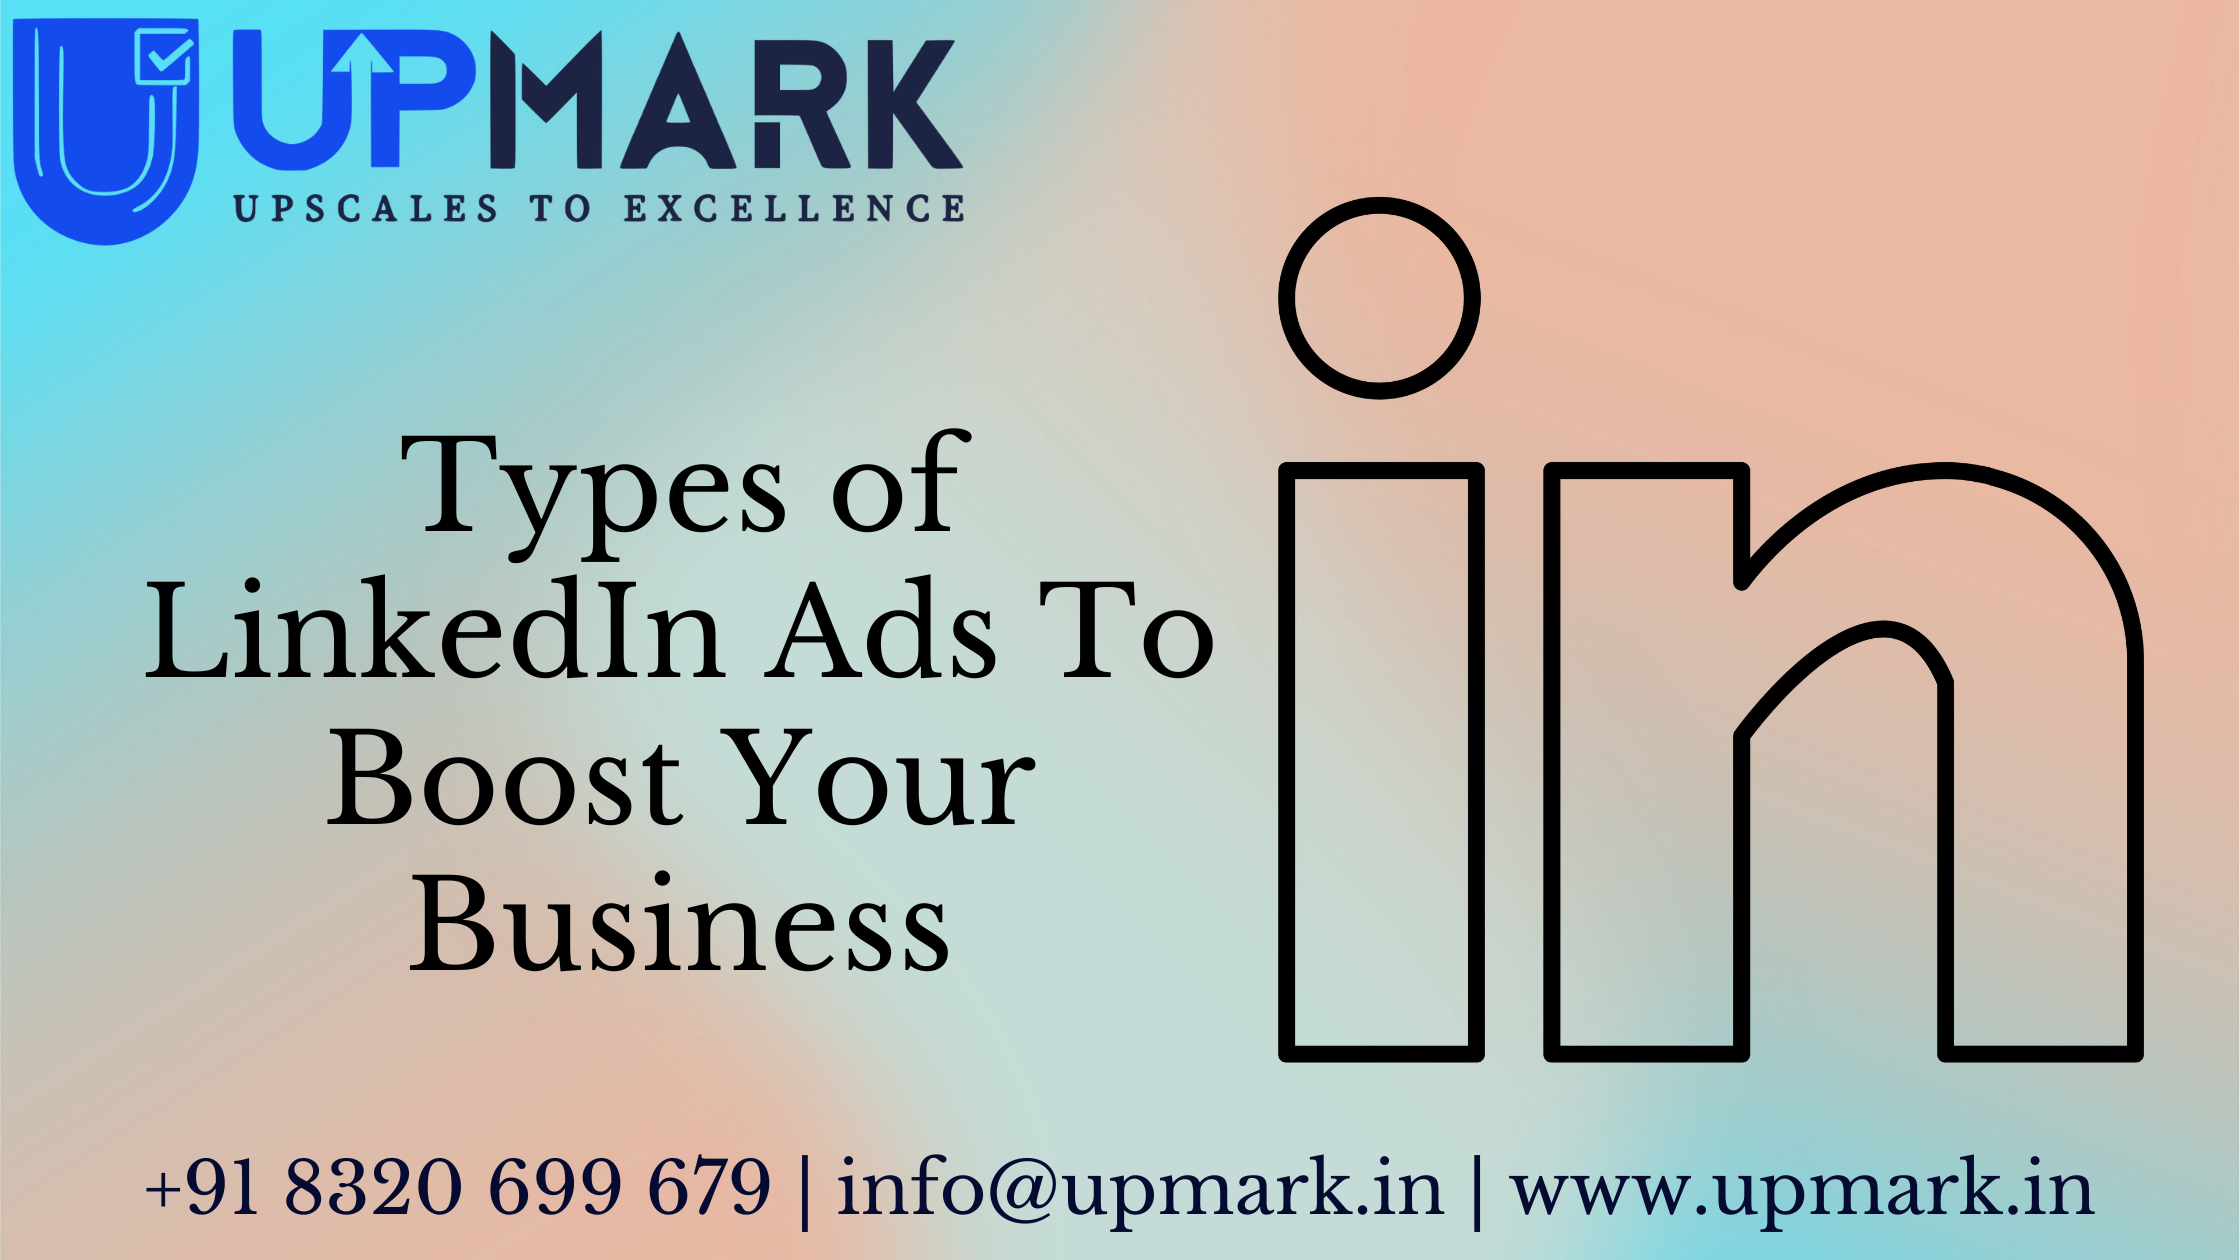 Types of LinkedIn Ads To Boost Your Business